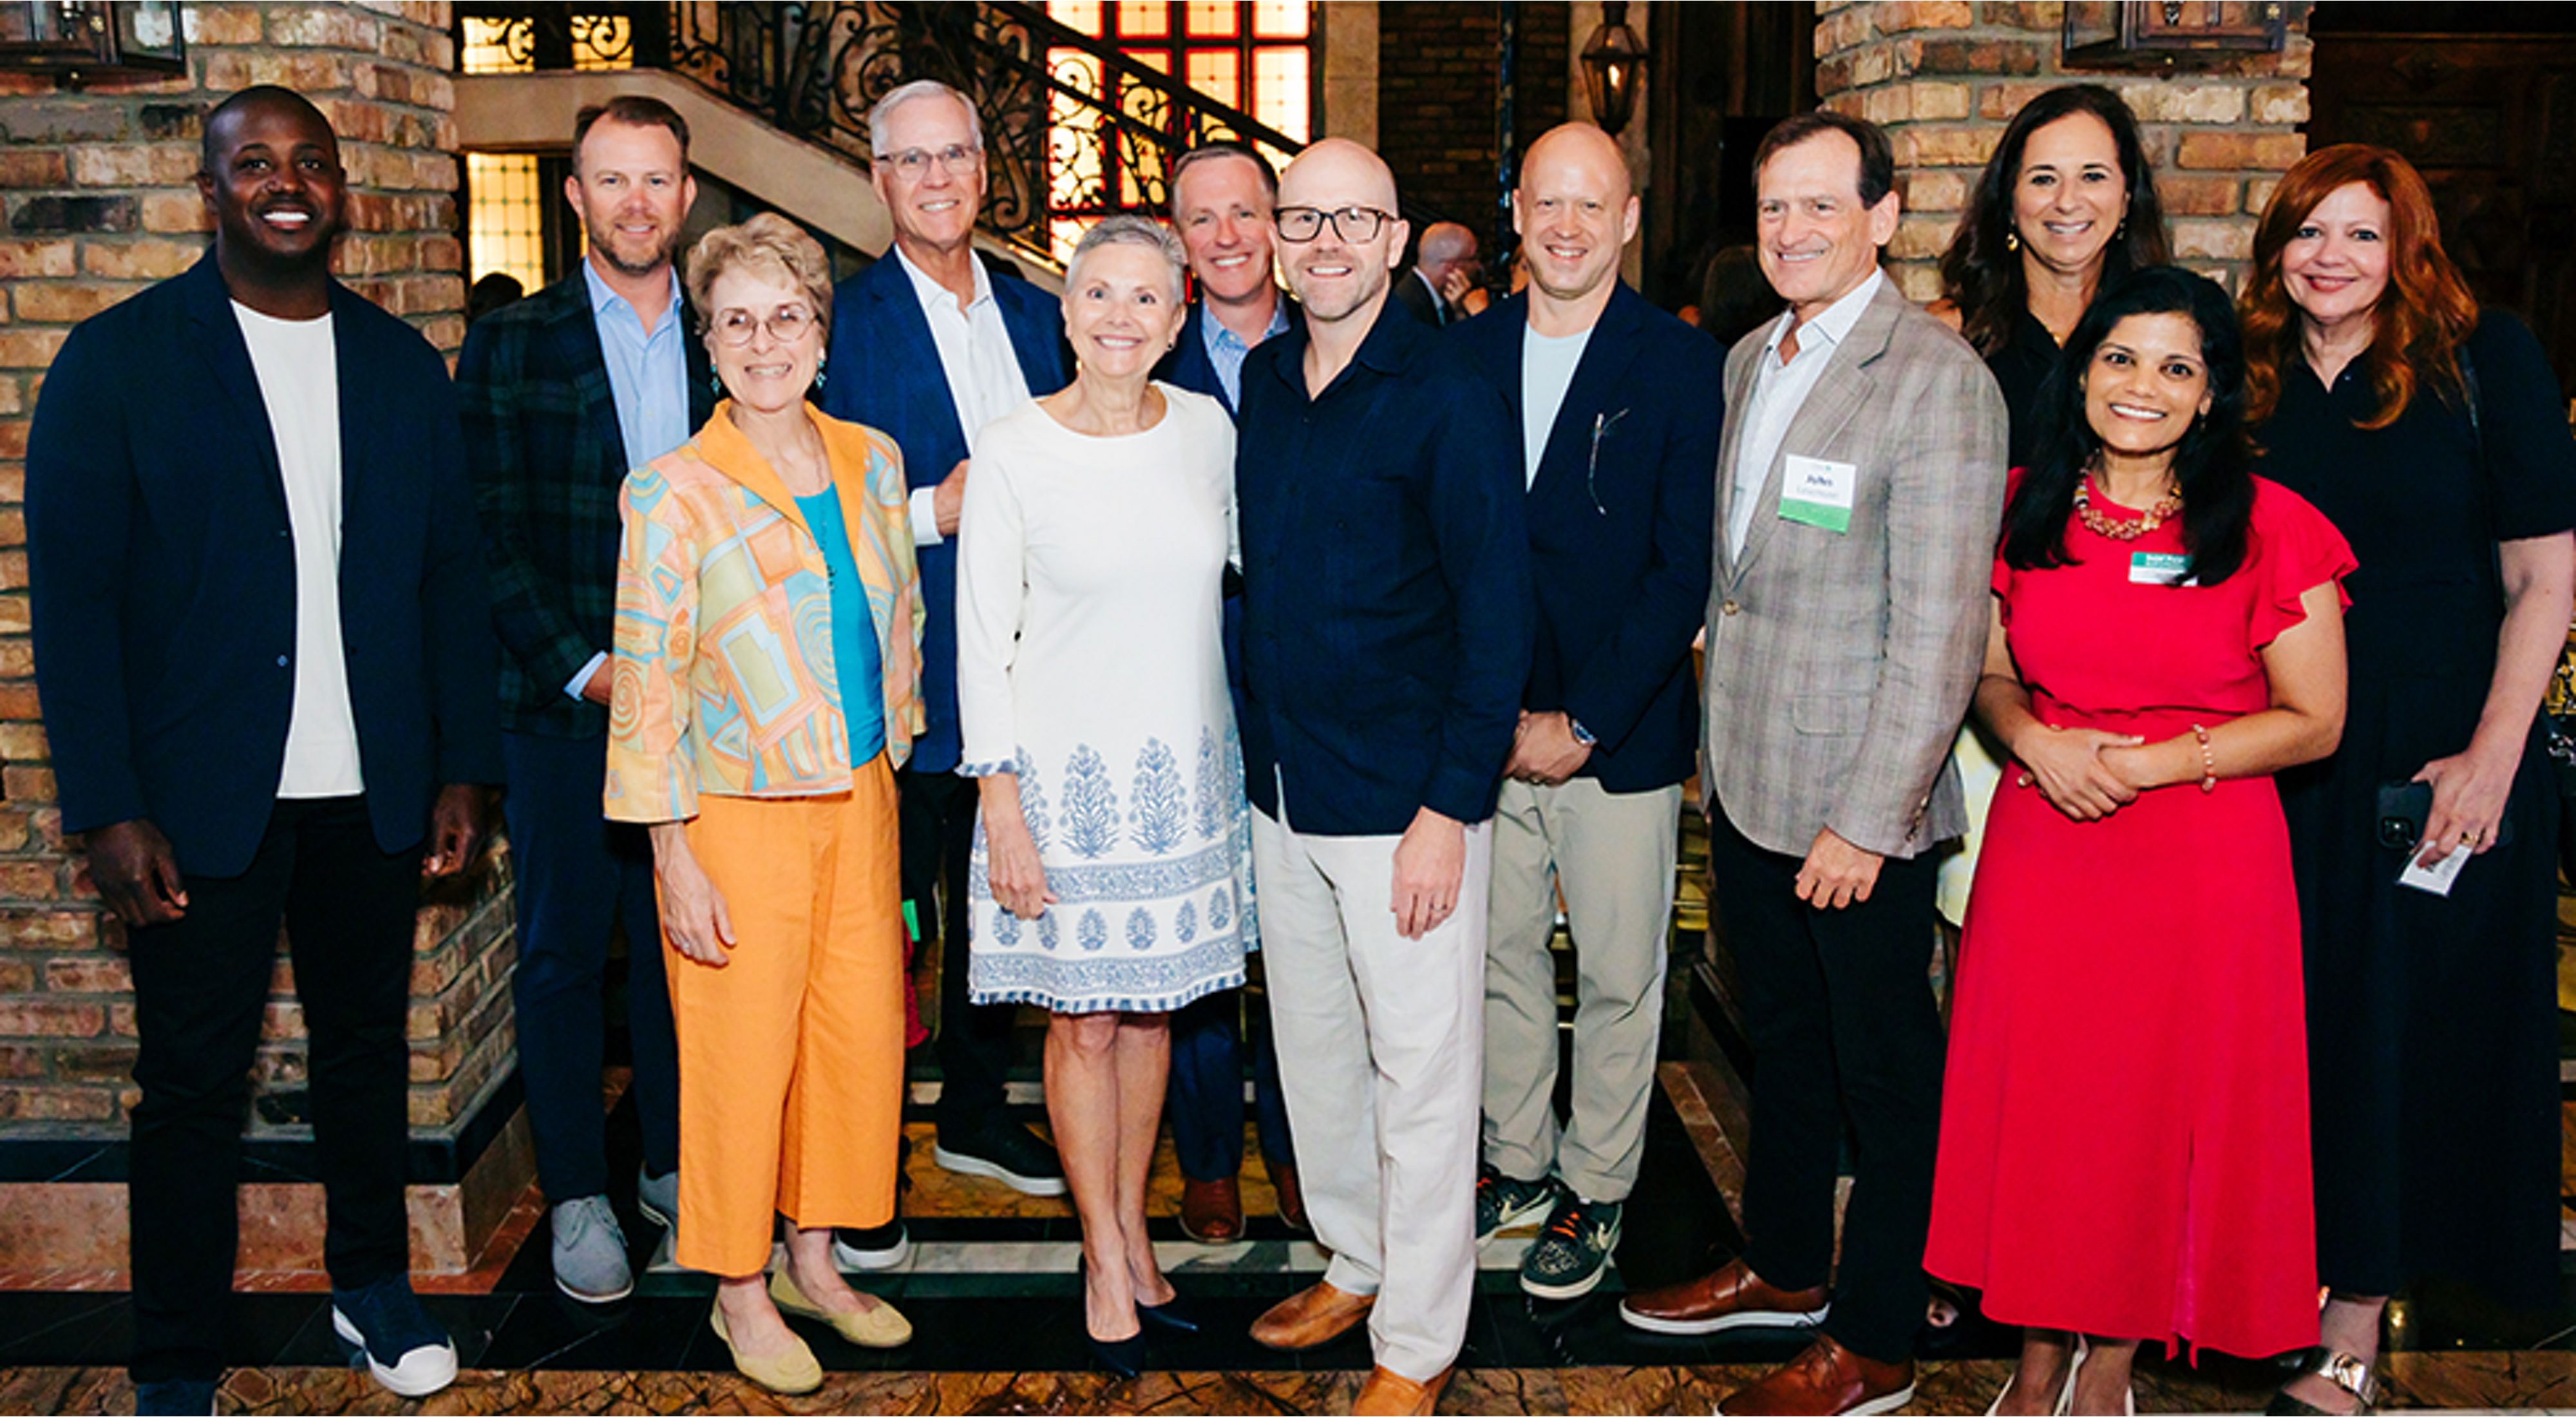 A group of people making up the Florida Board of Trustees pose together and smile at a Philanthropy dinner in Miami, Florida.